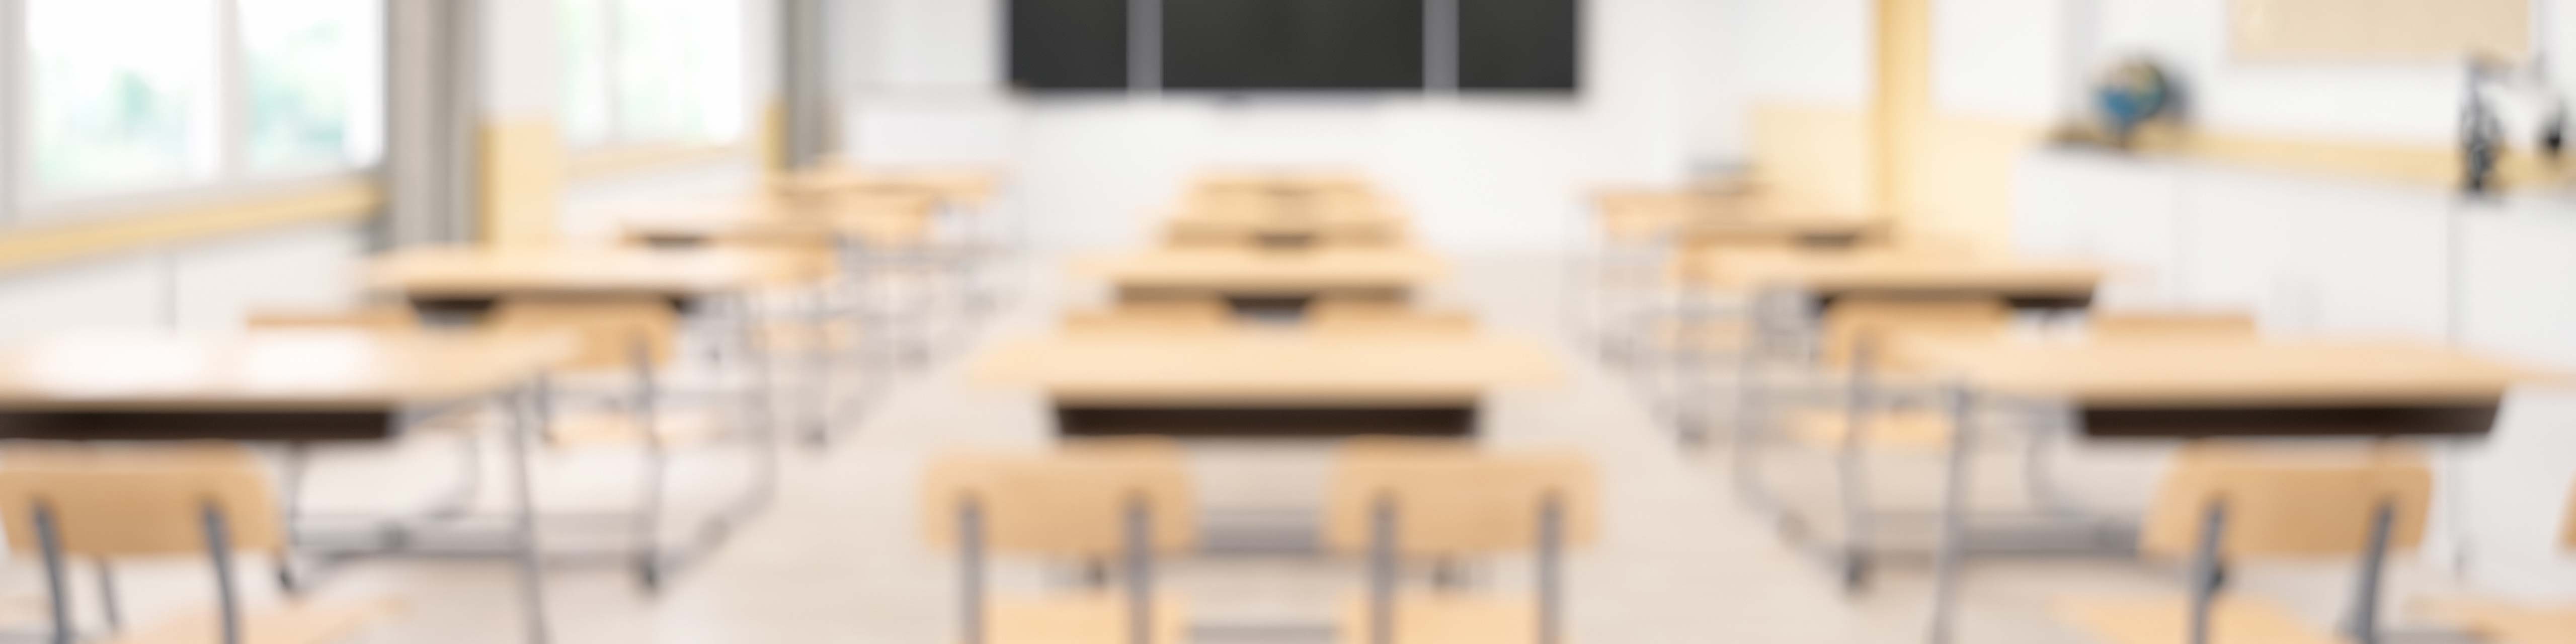 An out of focus image of an empty classroom